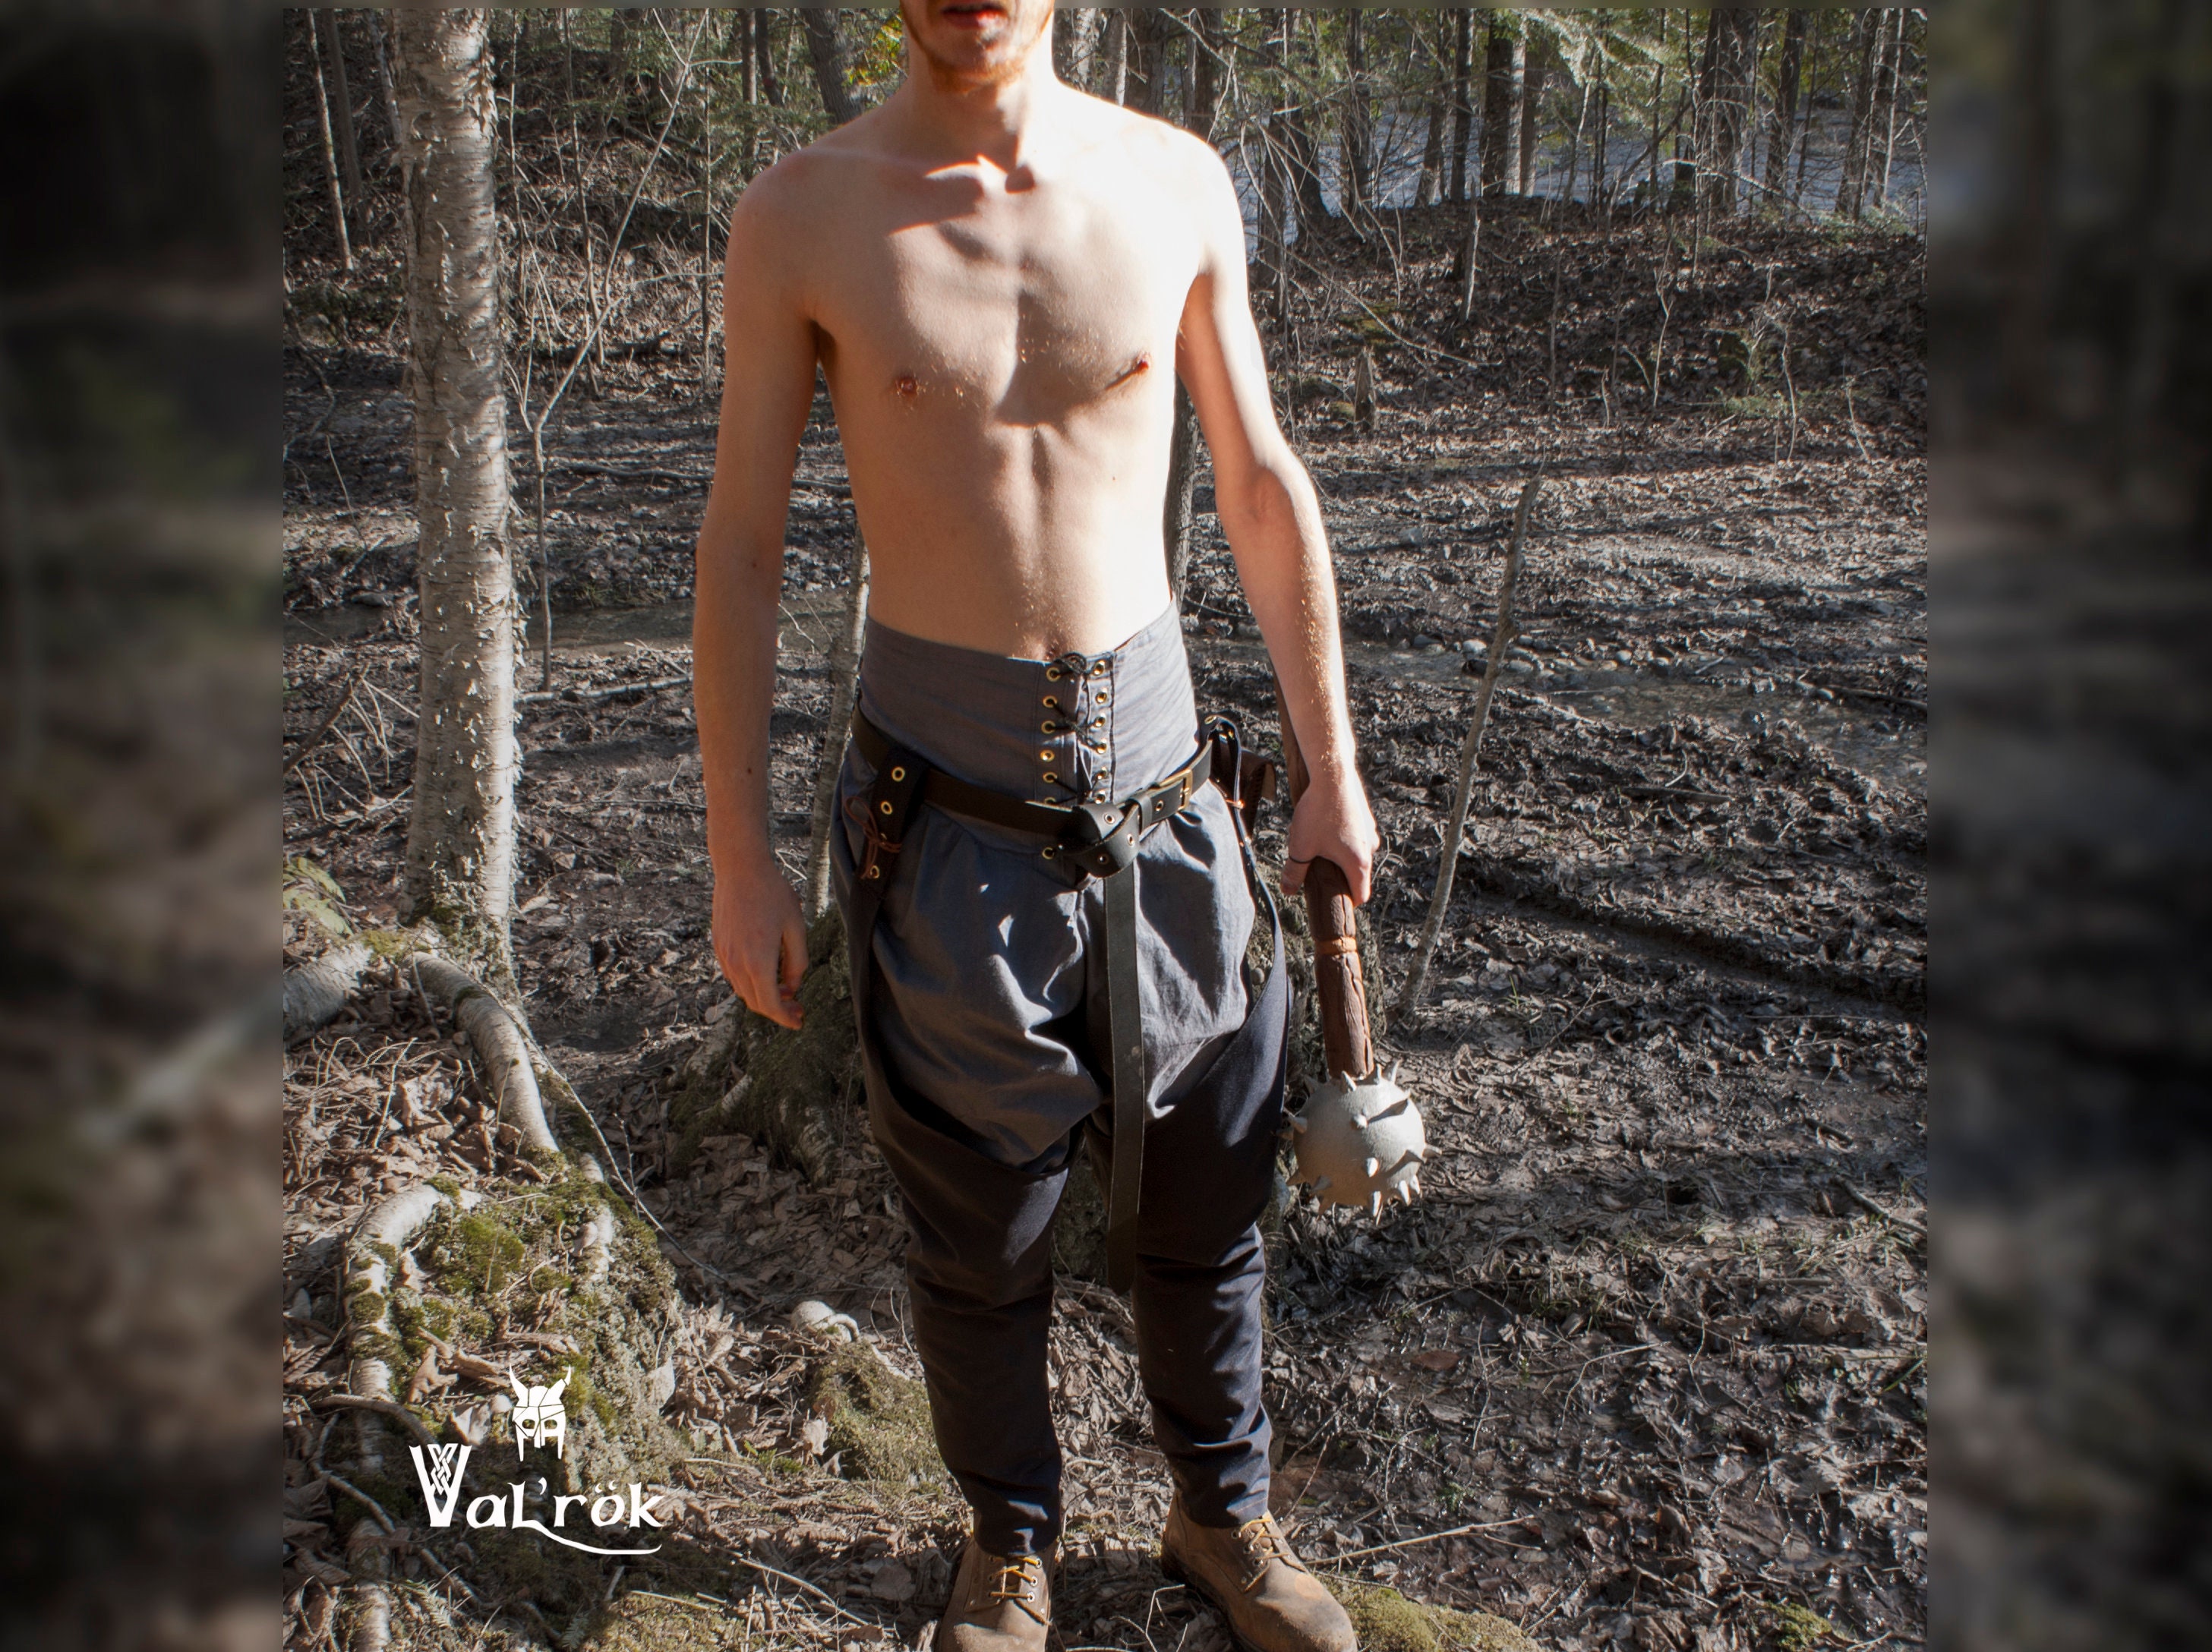 Early Medieval Viking Baggy Pants, LARP Canvas Trousers